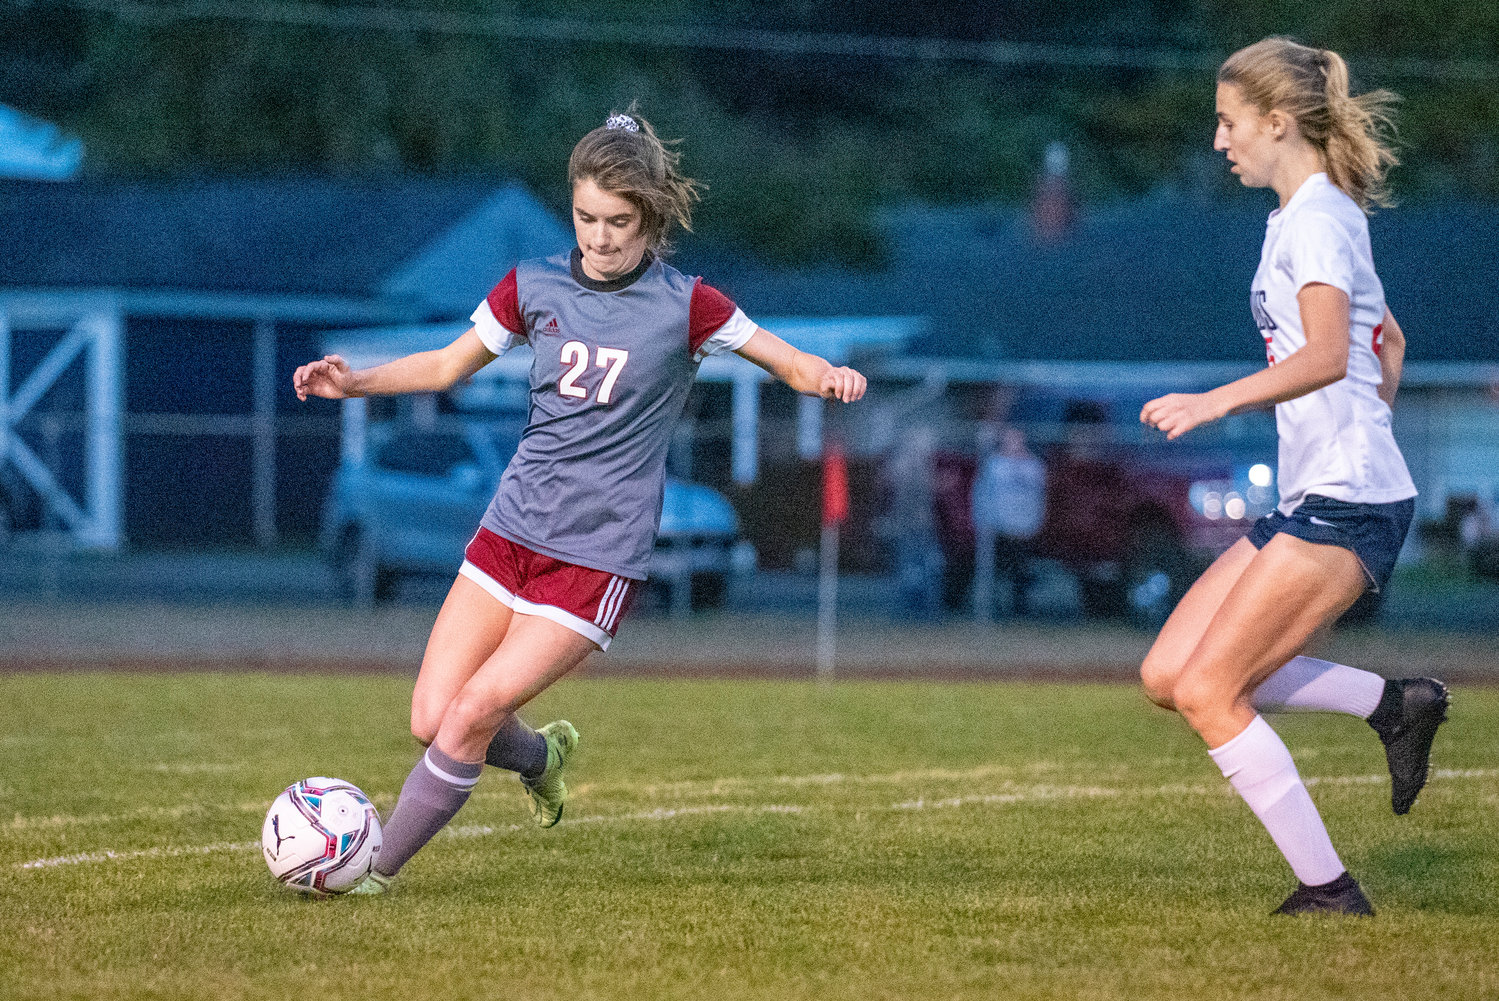 W.F. West's Audrey Toynbee (27) clears a ball against Black Hills on Tuesday.